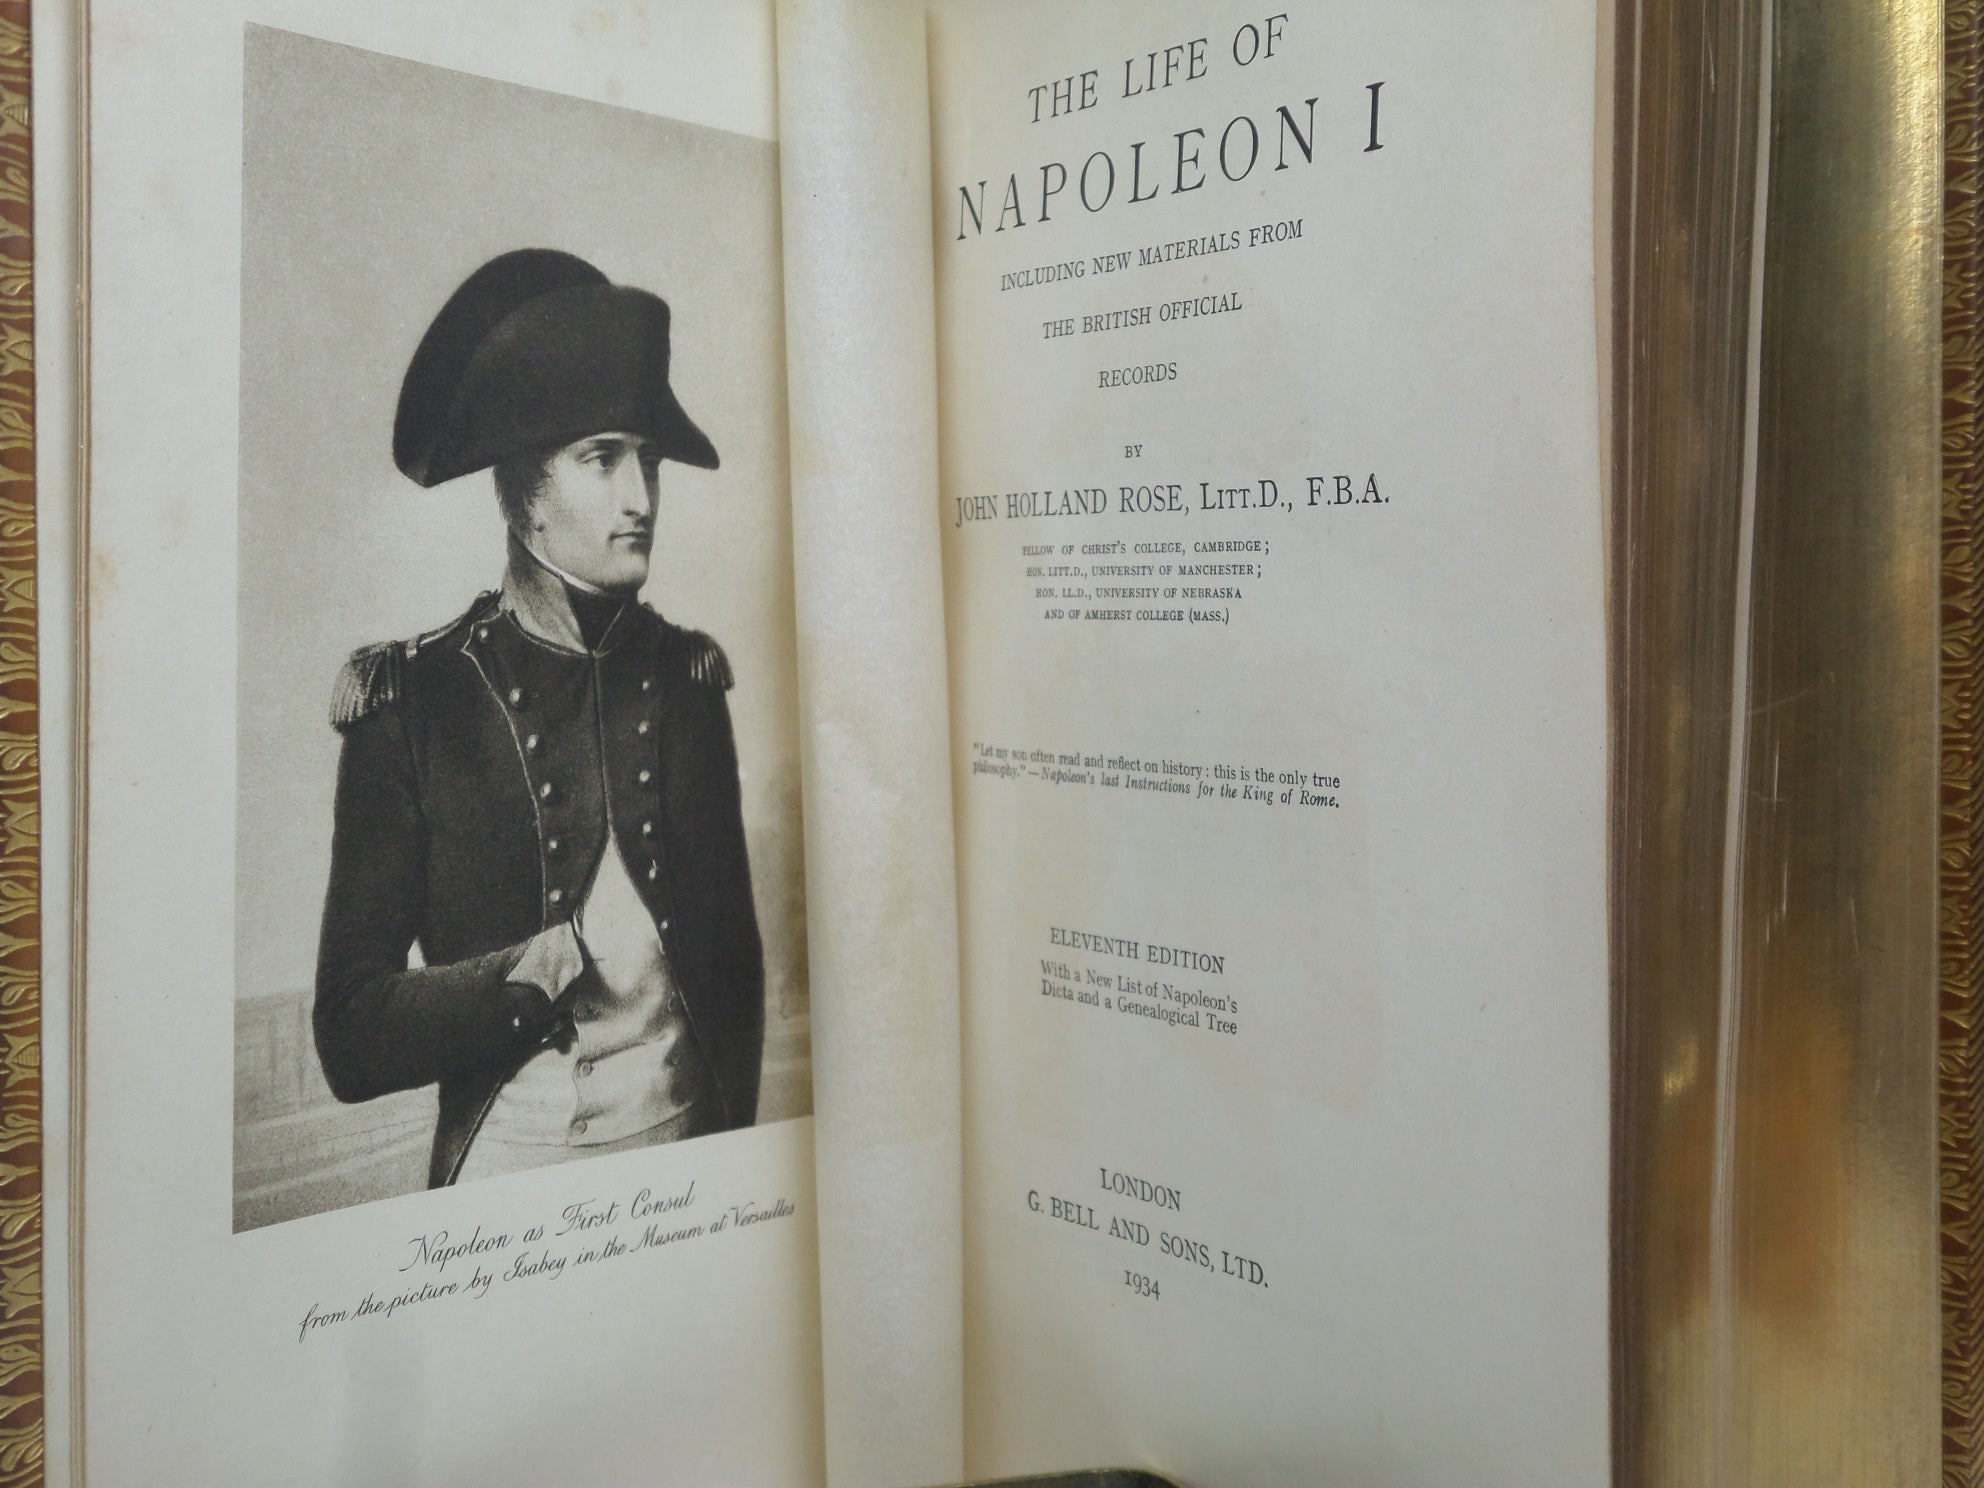 THE LIFE OF NAPOLEON I BY JOHN HOLLAND ROSE 1934 FINE LEATHER BINDING